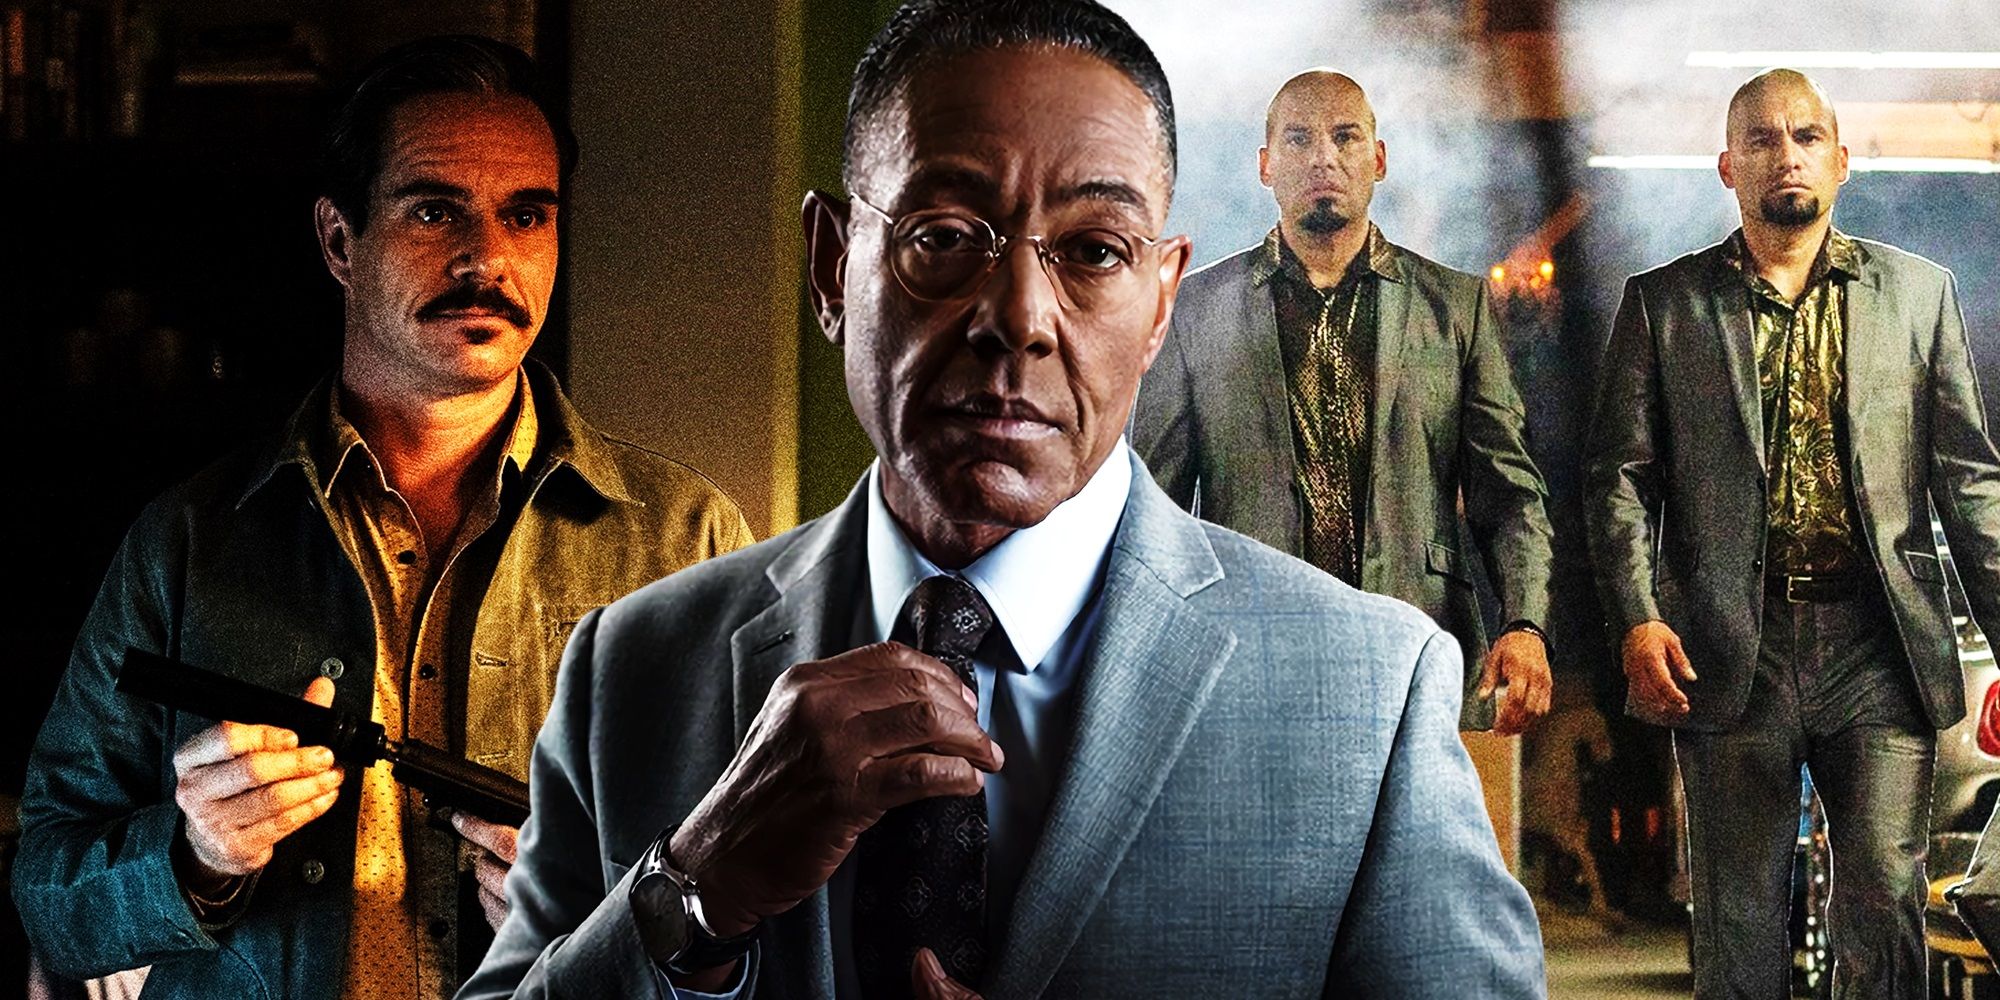 Collage of Lalo in Better Call Saul and Gus Fring and the Cousins in Breaking Bad